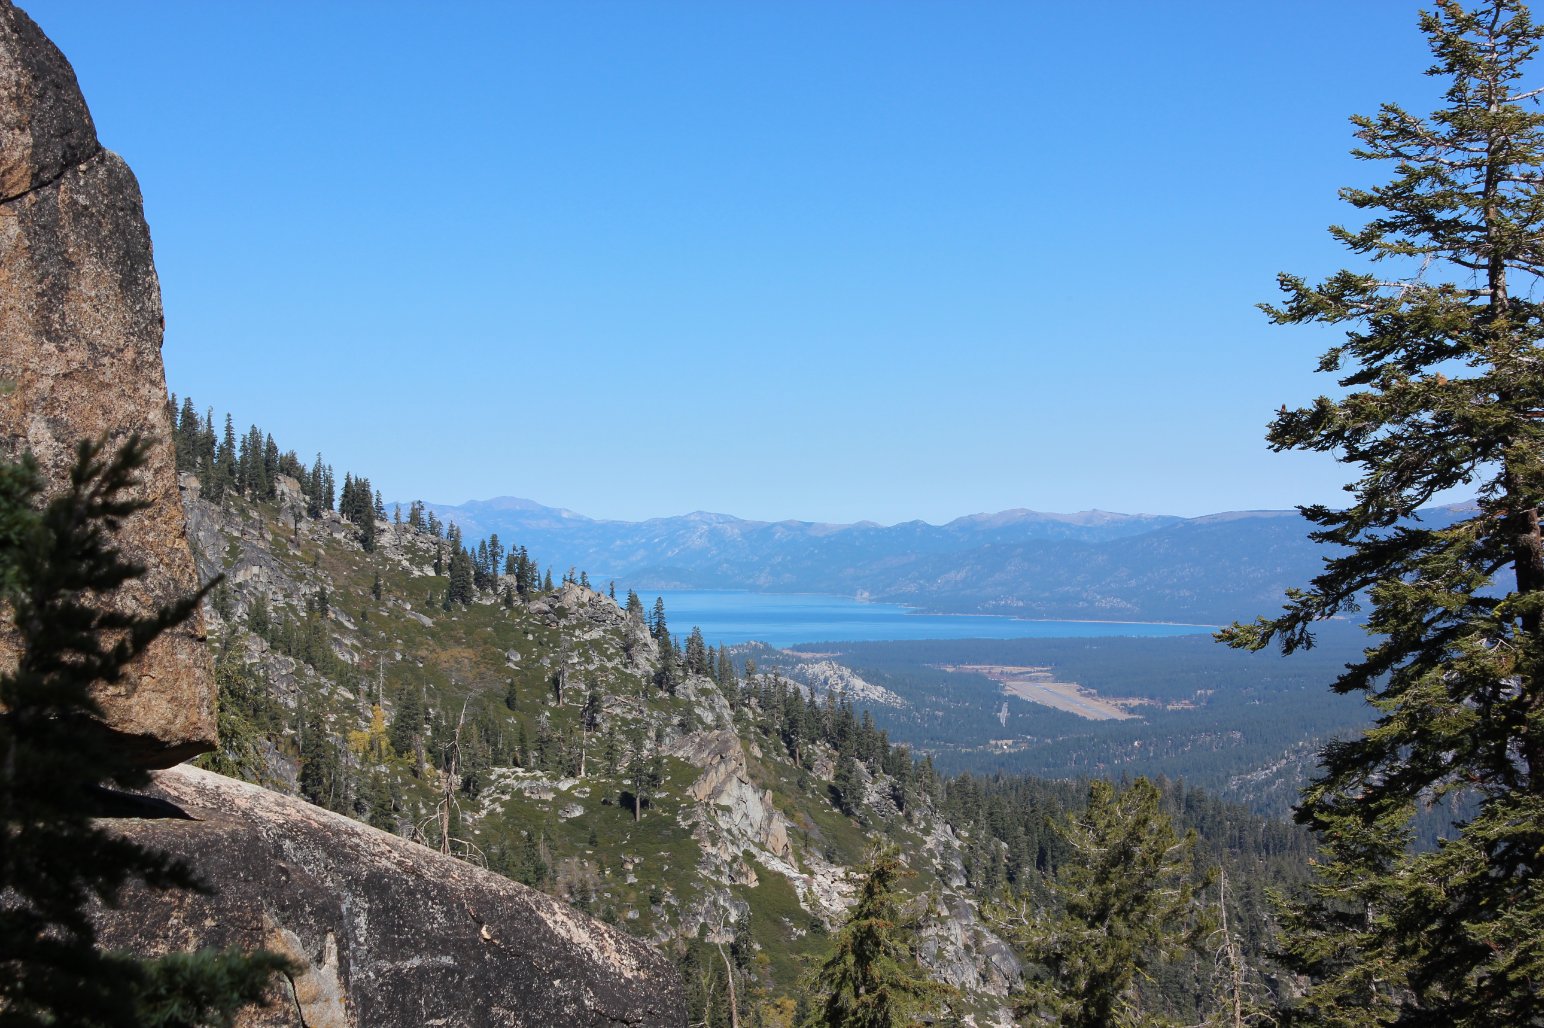 Lake Tahoe from the PCT